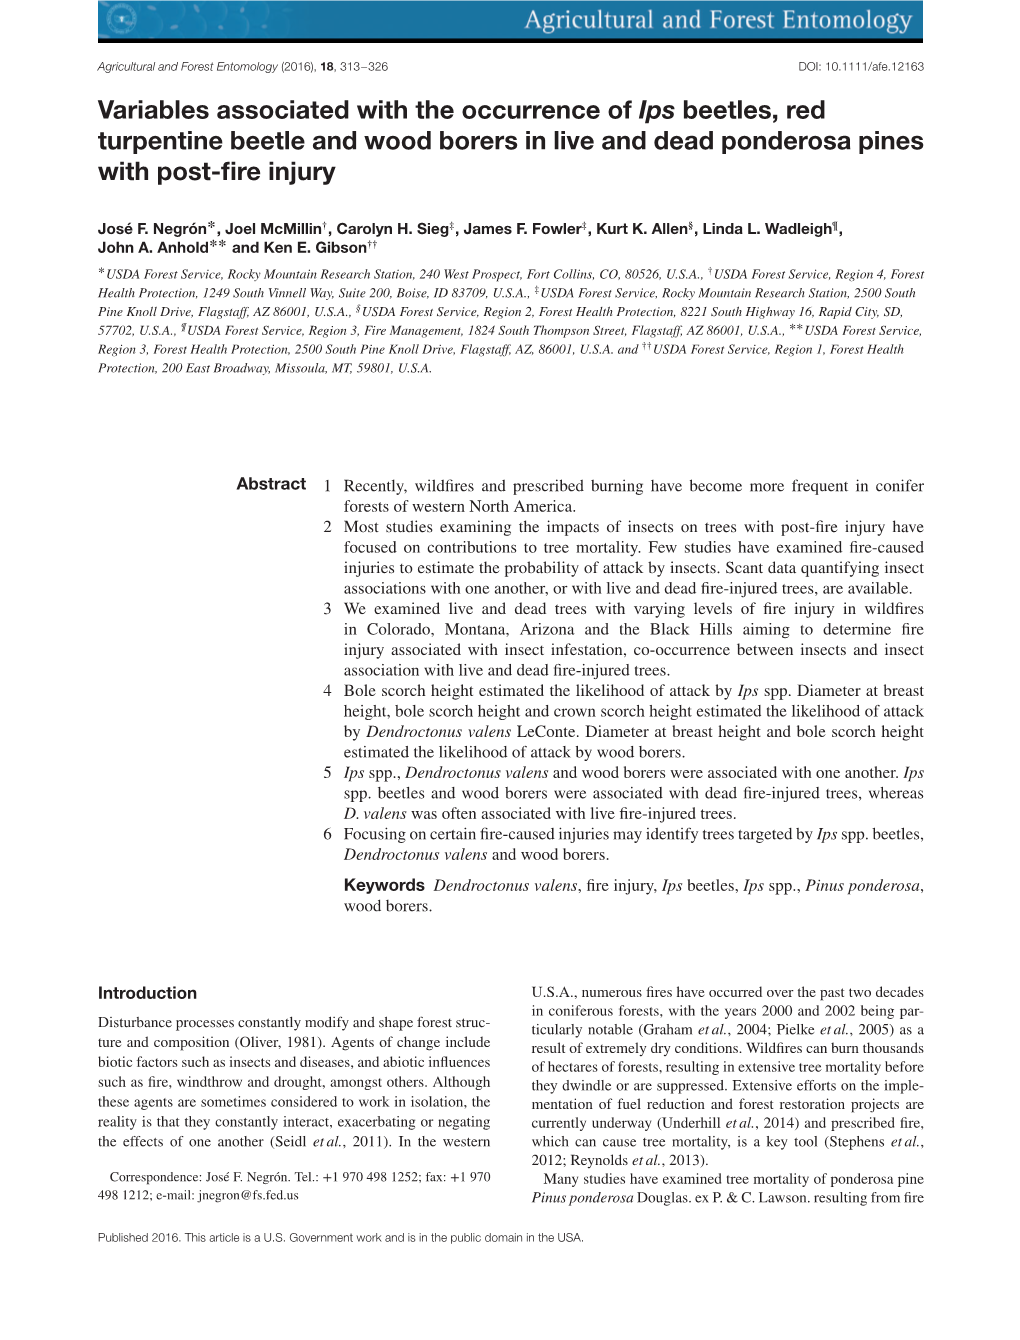 Variables Associated with the Occurrence of Ips Beetles, Red Turpentine Beetle and Wood Borers in Live and Dead Ponderosa Pines with Post-ﬁre Injury